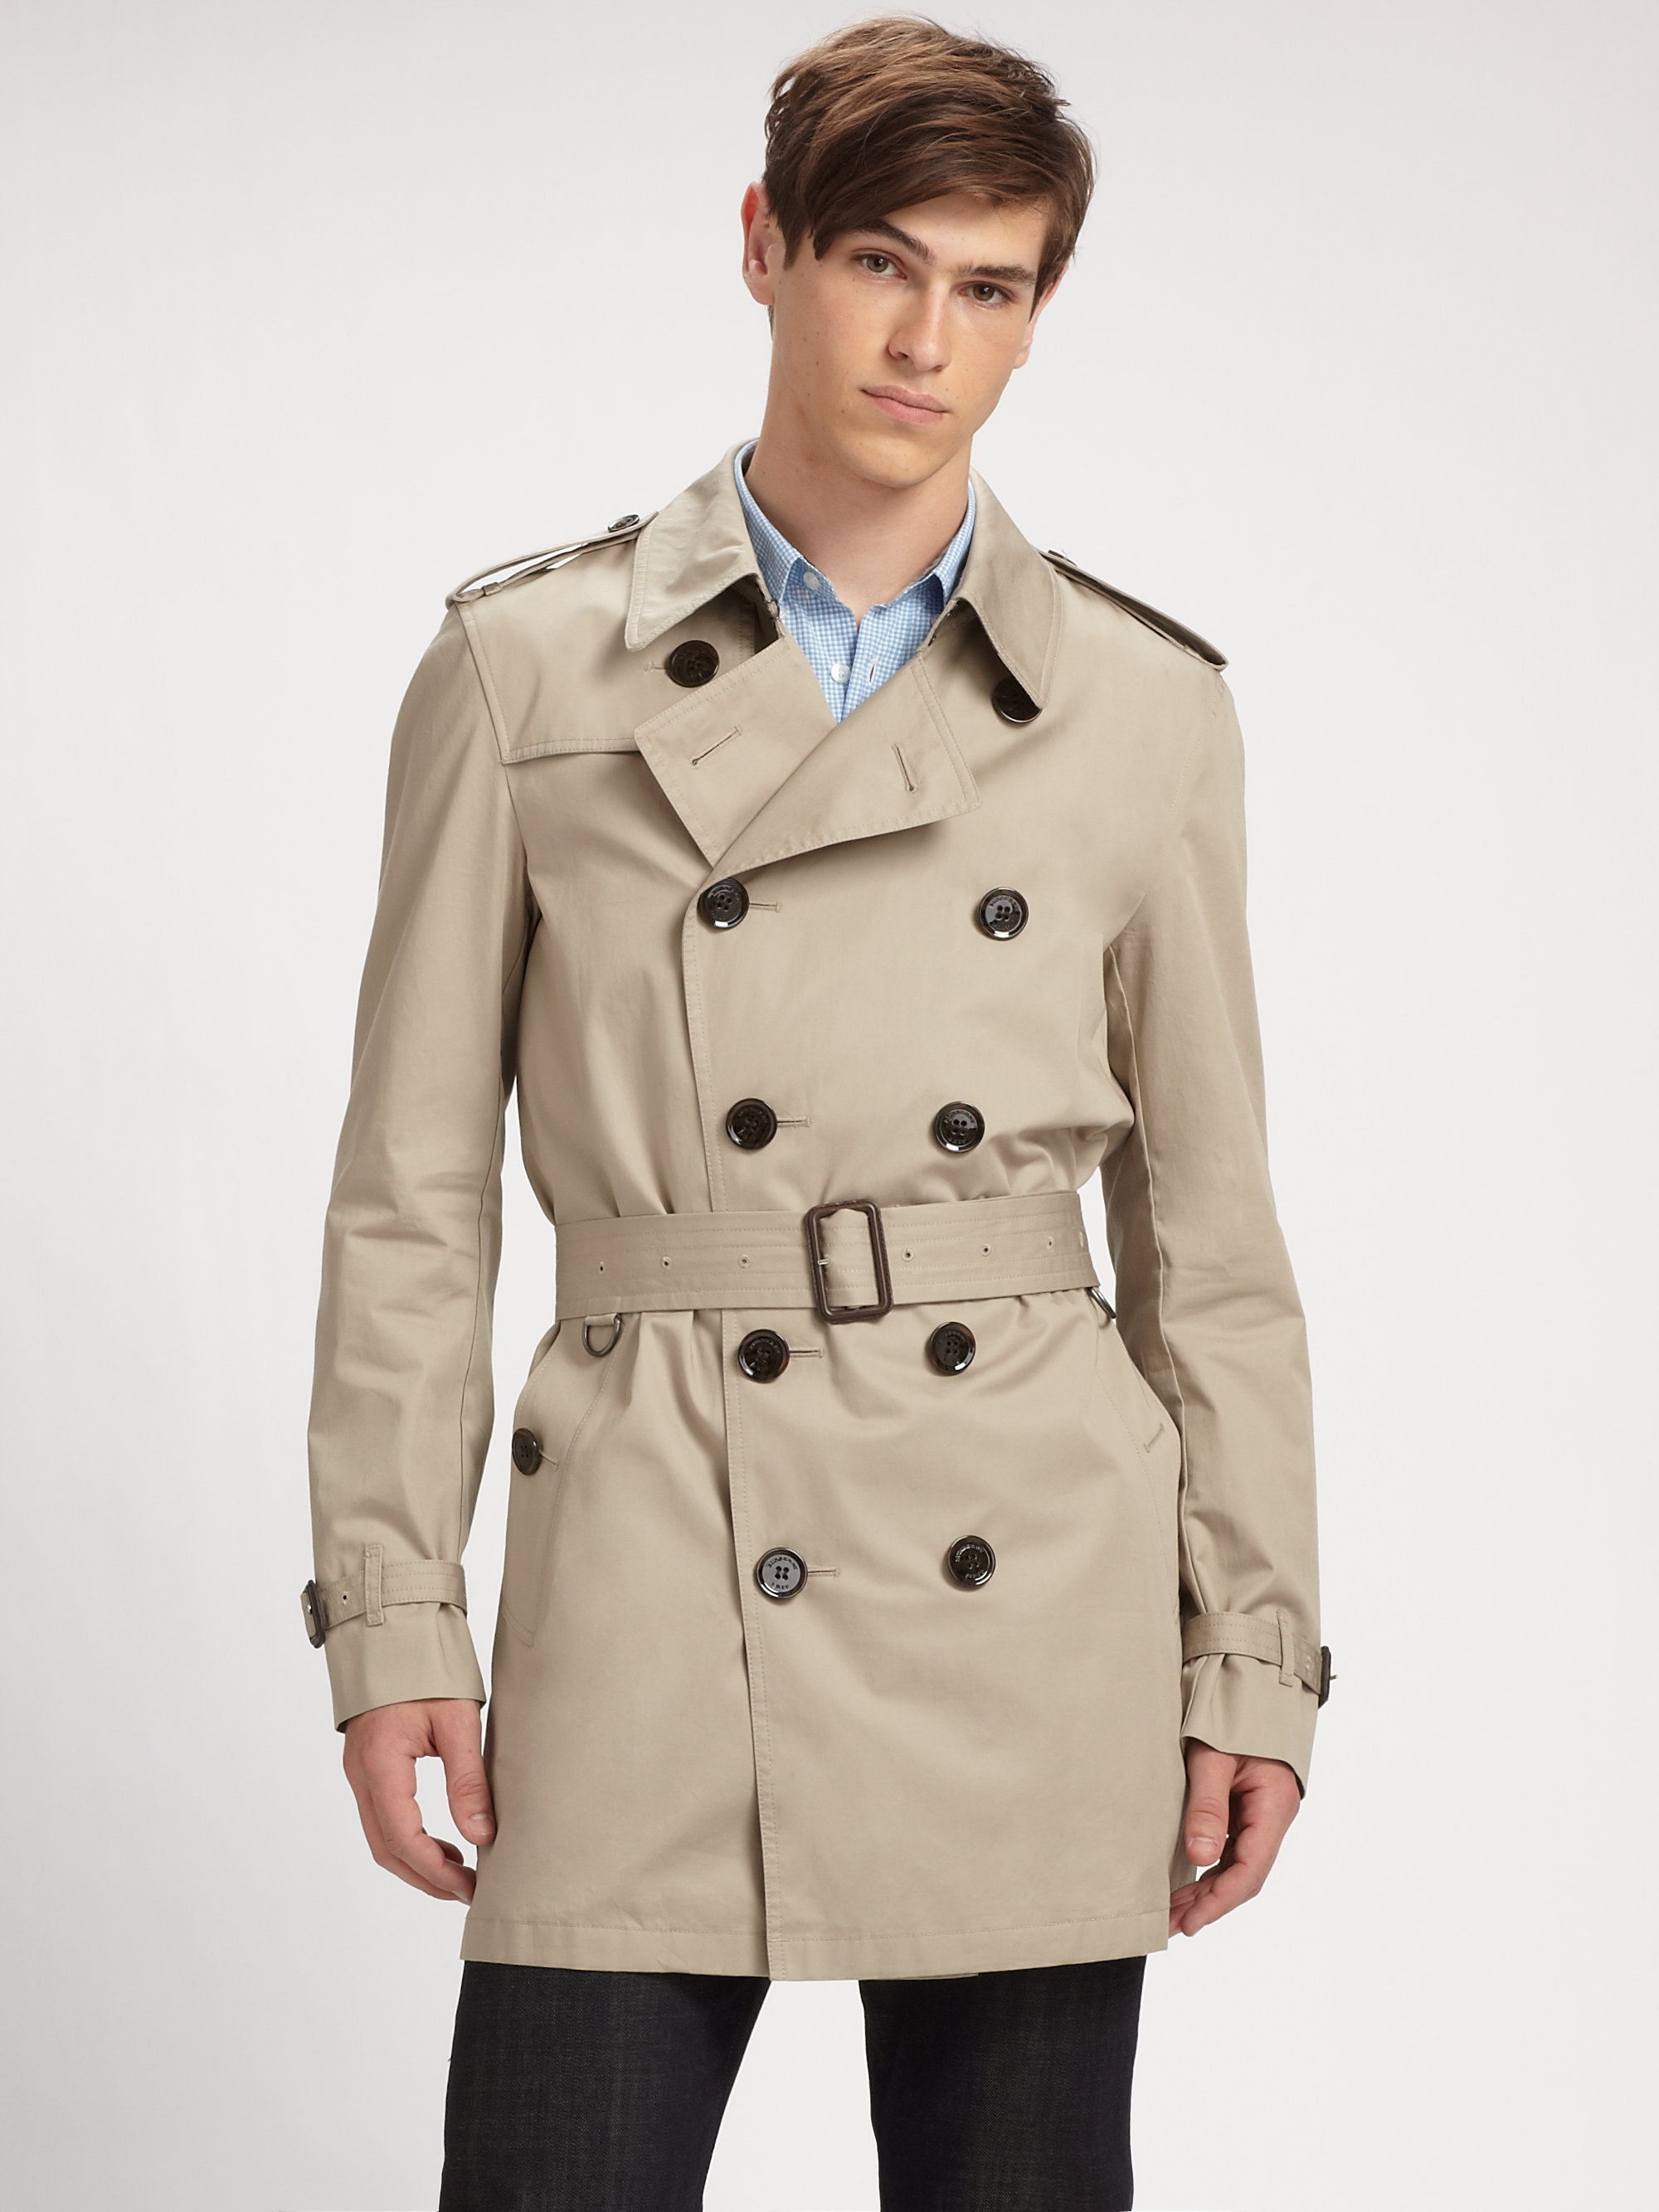 Burberry Brit Trench Coat in Taupe (Brown) for Men - Lyst